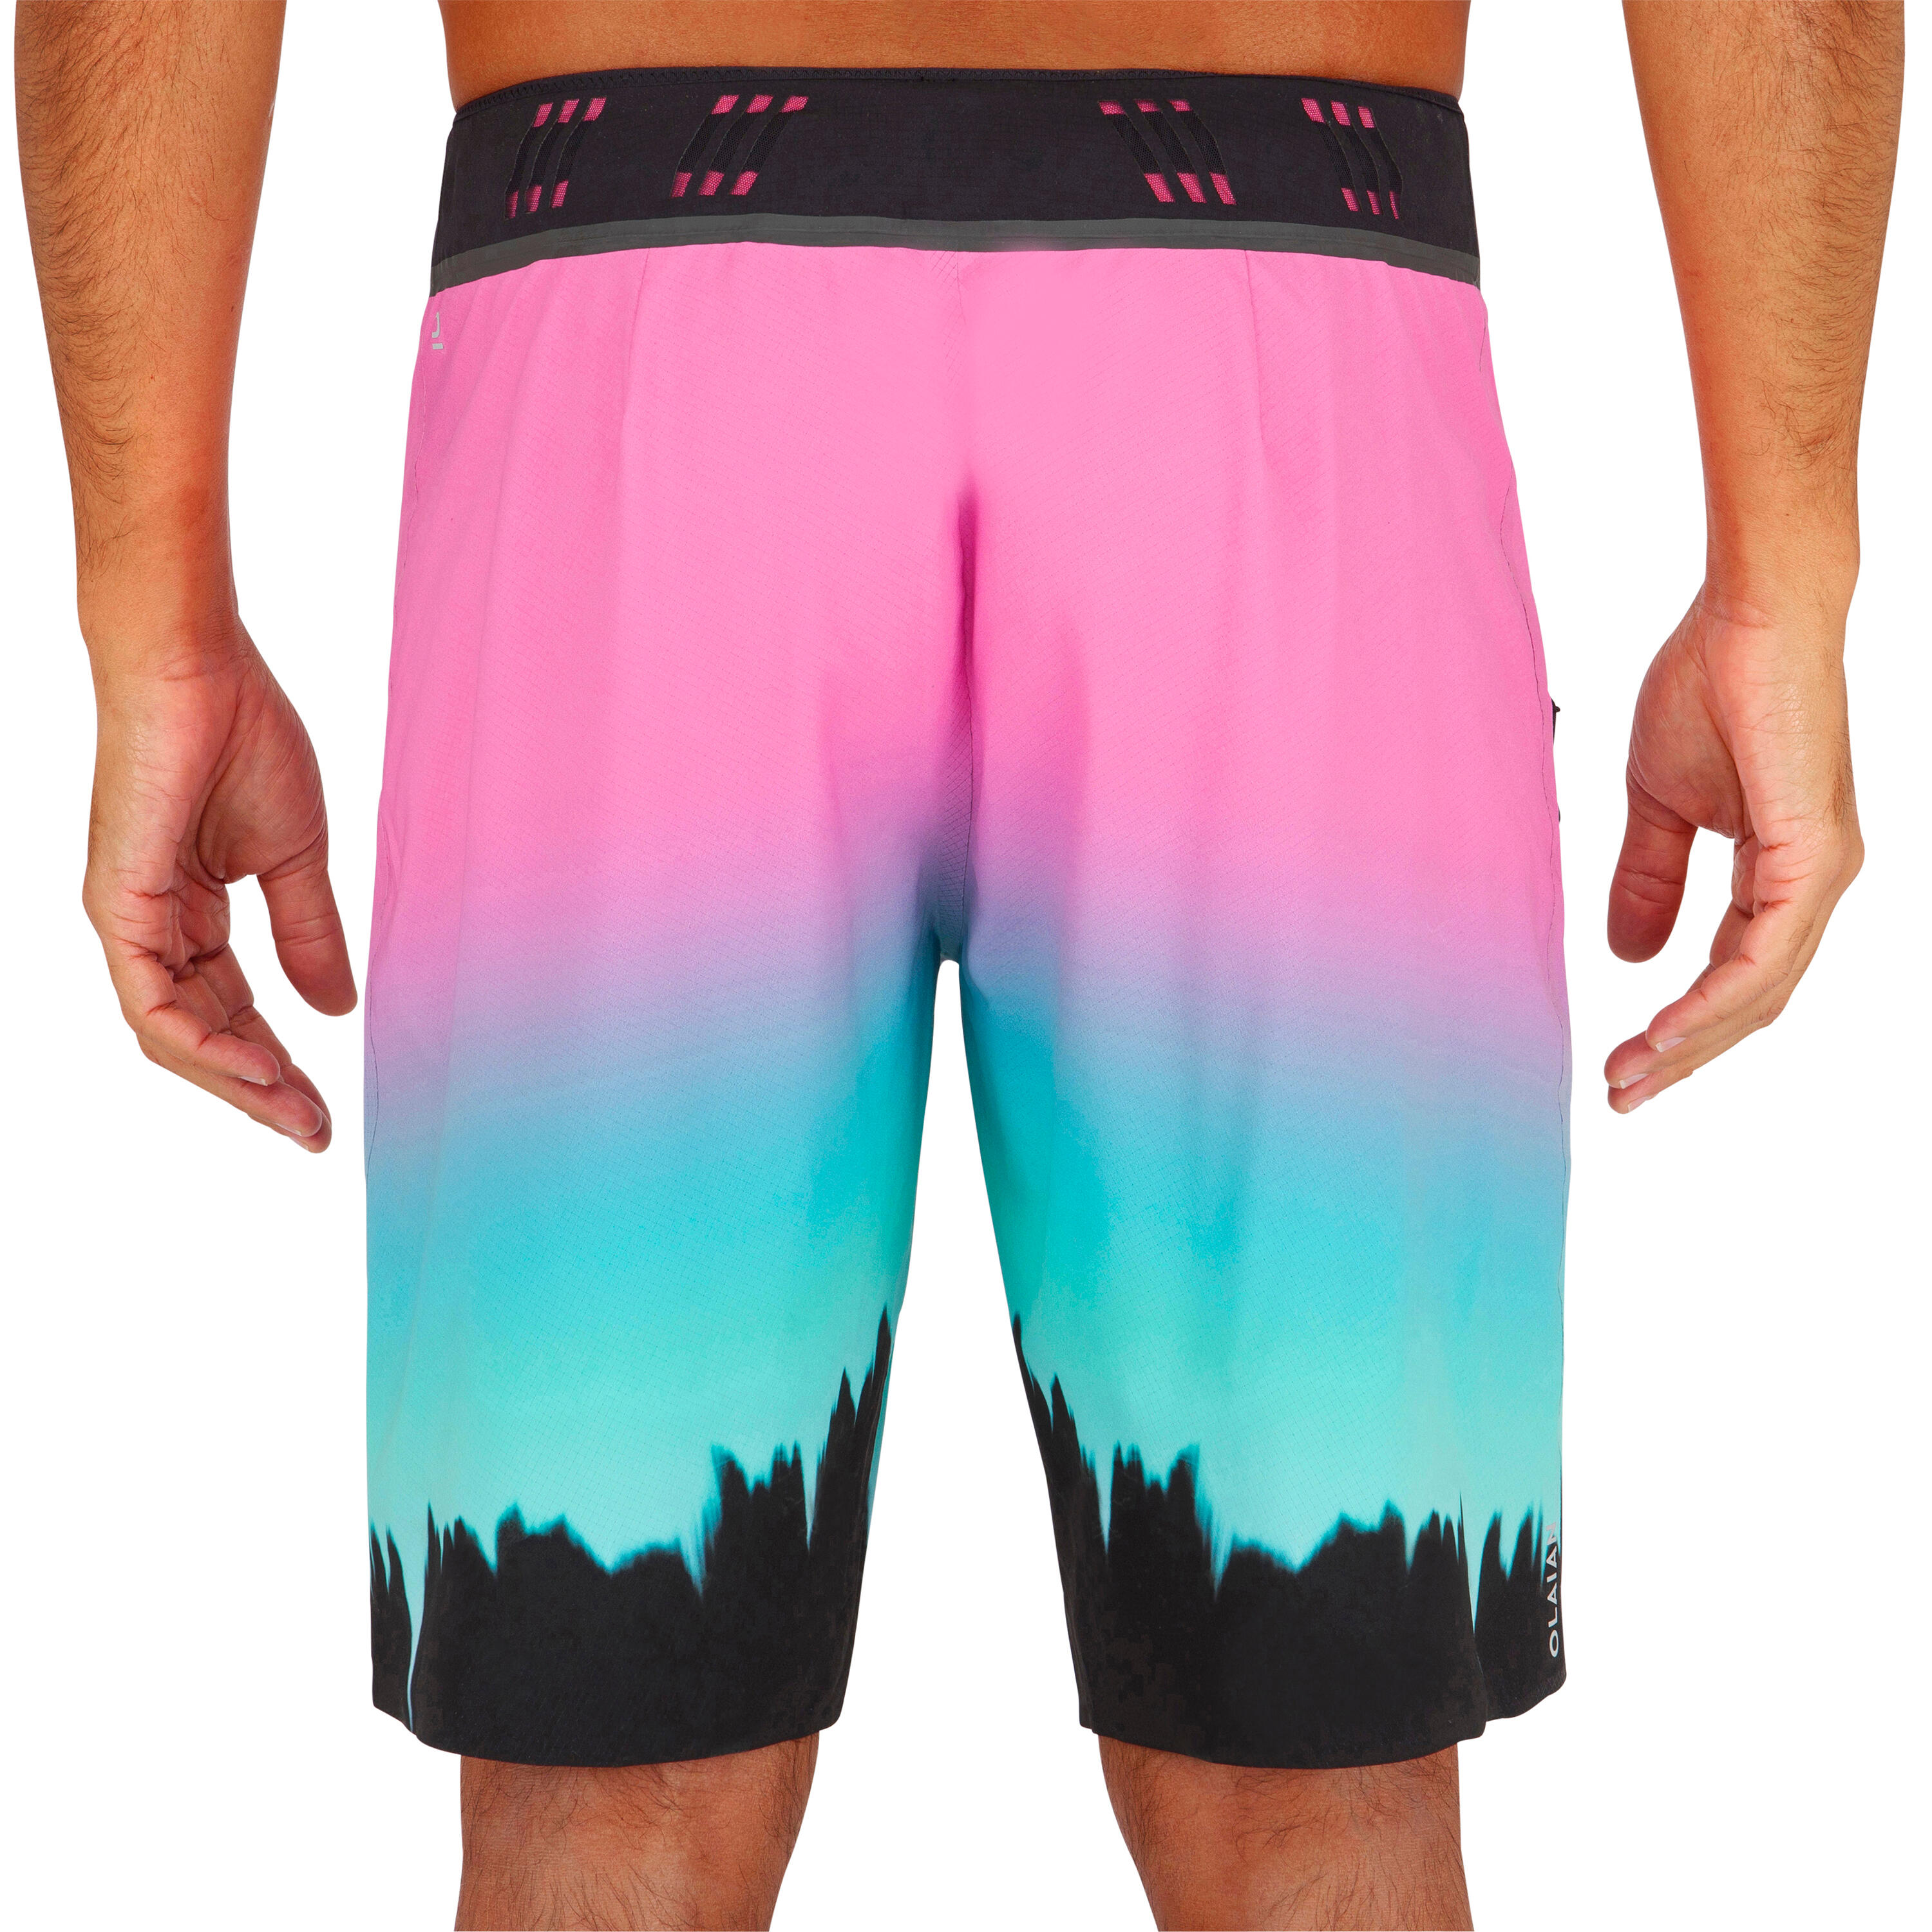 Long Surfing Boardshorts 900 - Grungy Pink. 4/12